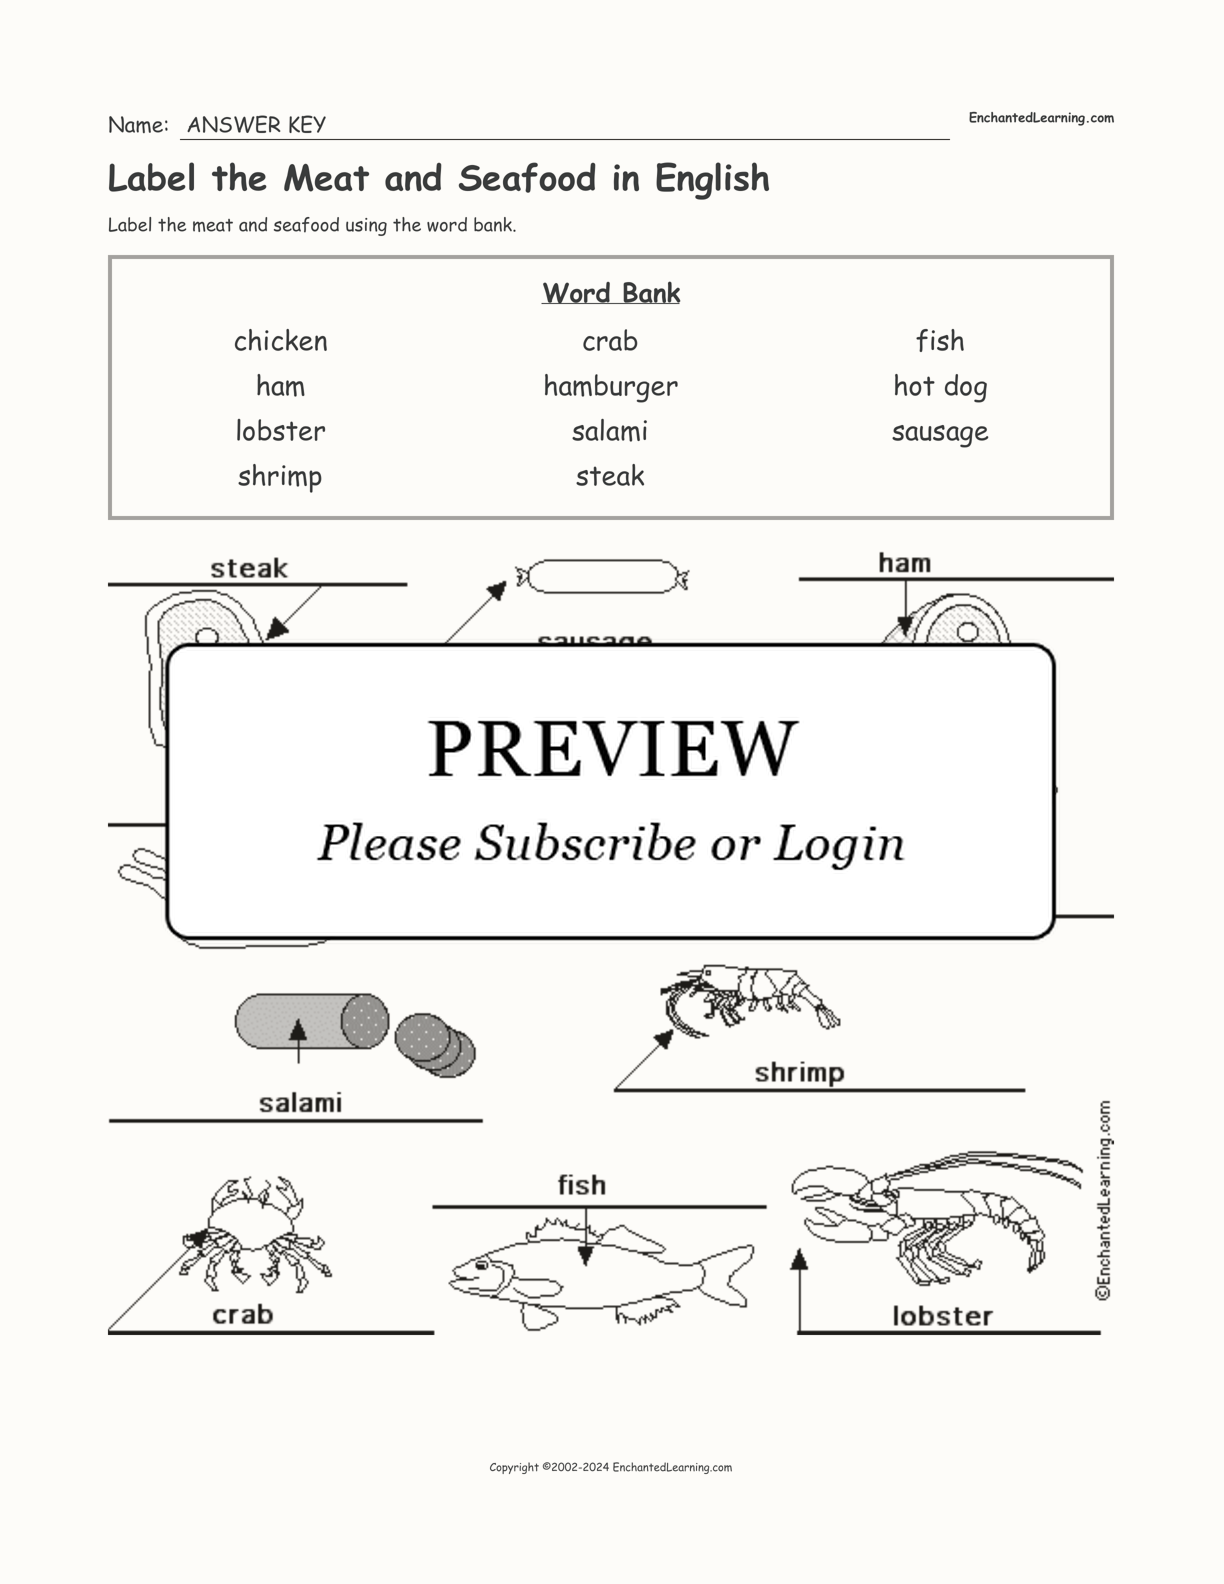 Label the Meat and Seafood in English interactive worksheet page 2